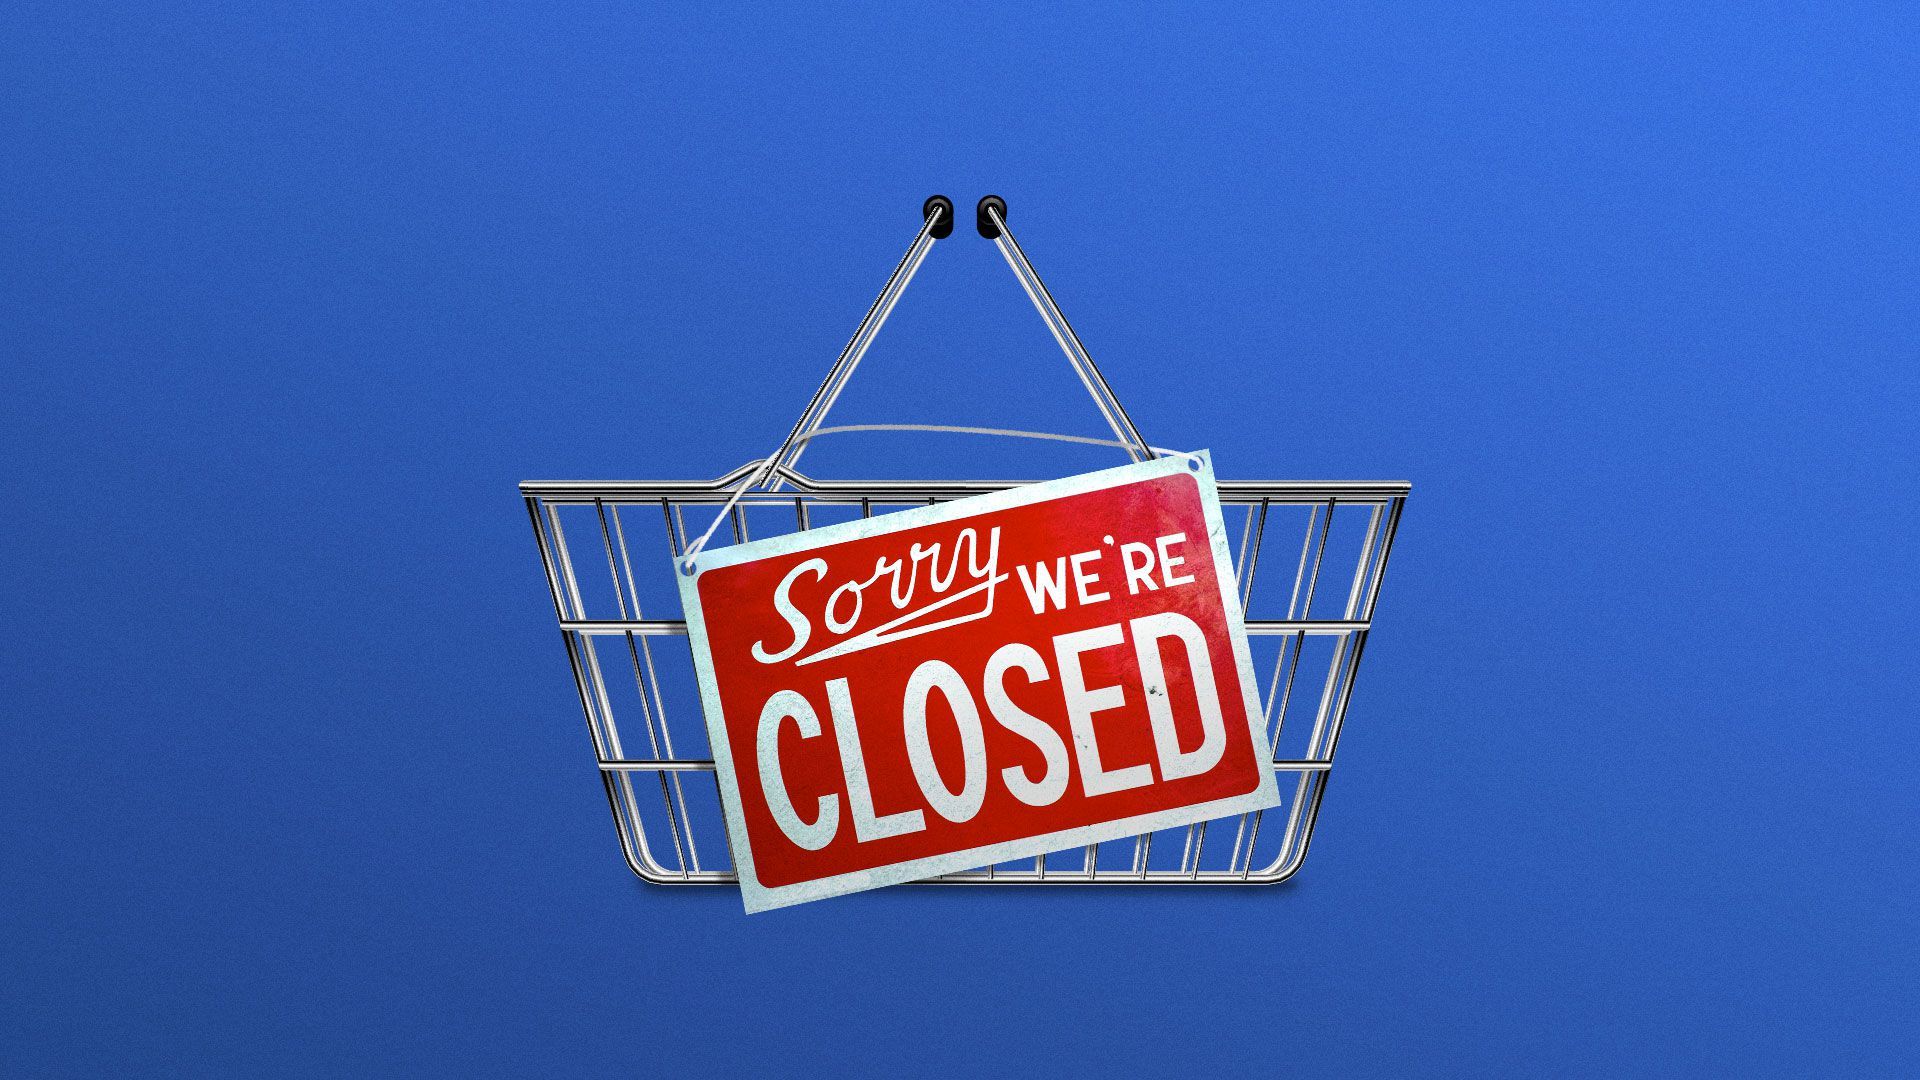 Illustration of hand-held shopping cart with “Sorry We’re Closed” sign.